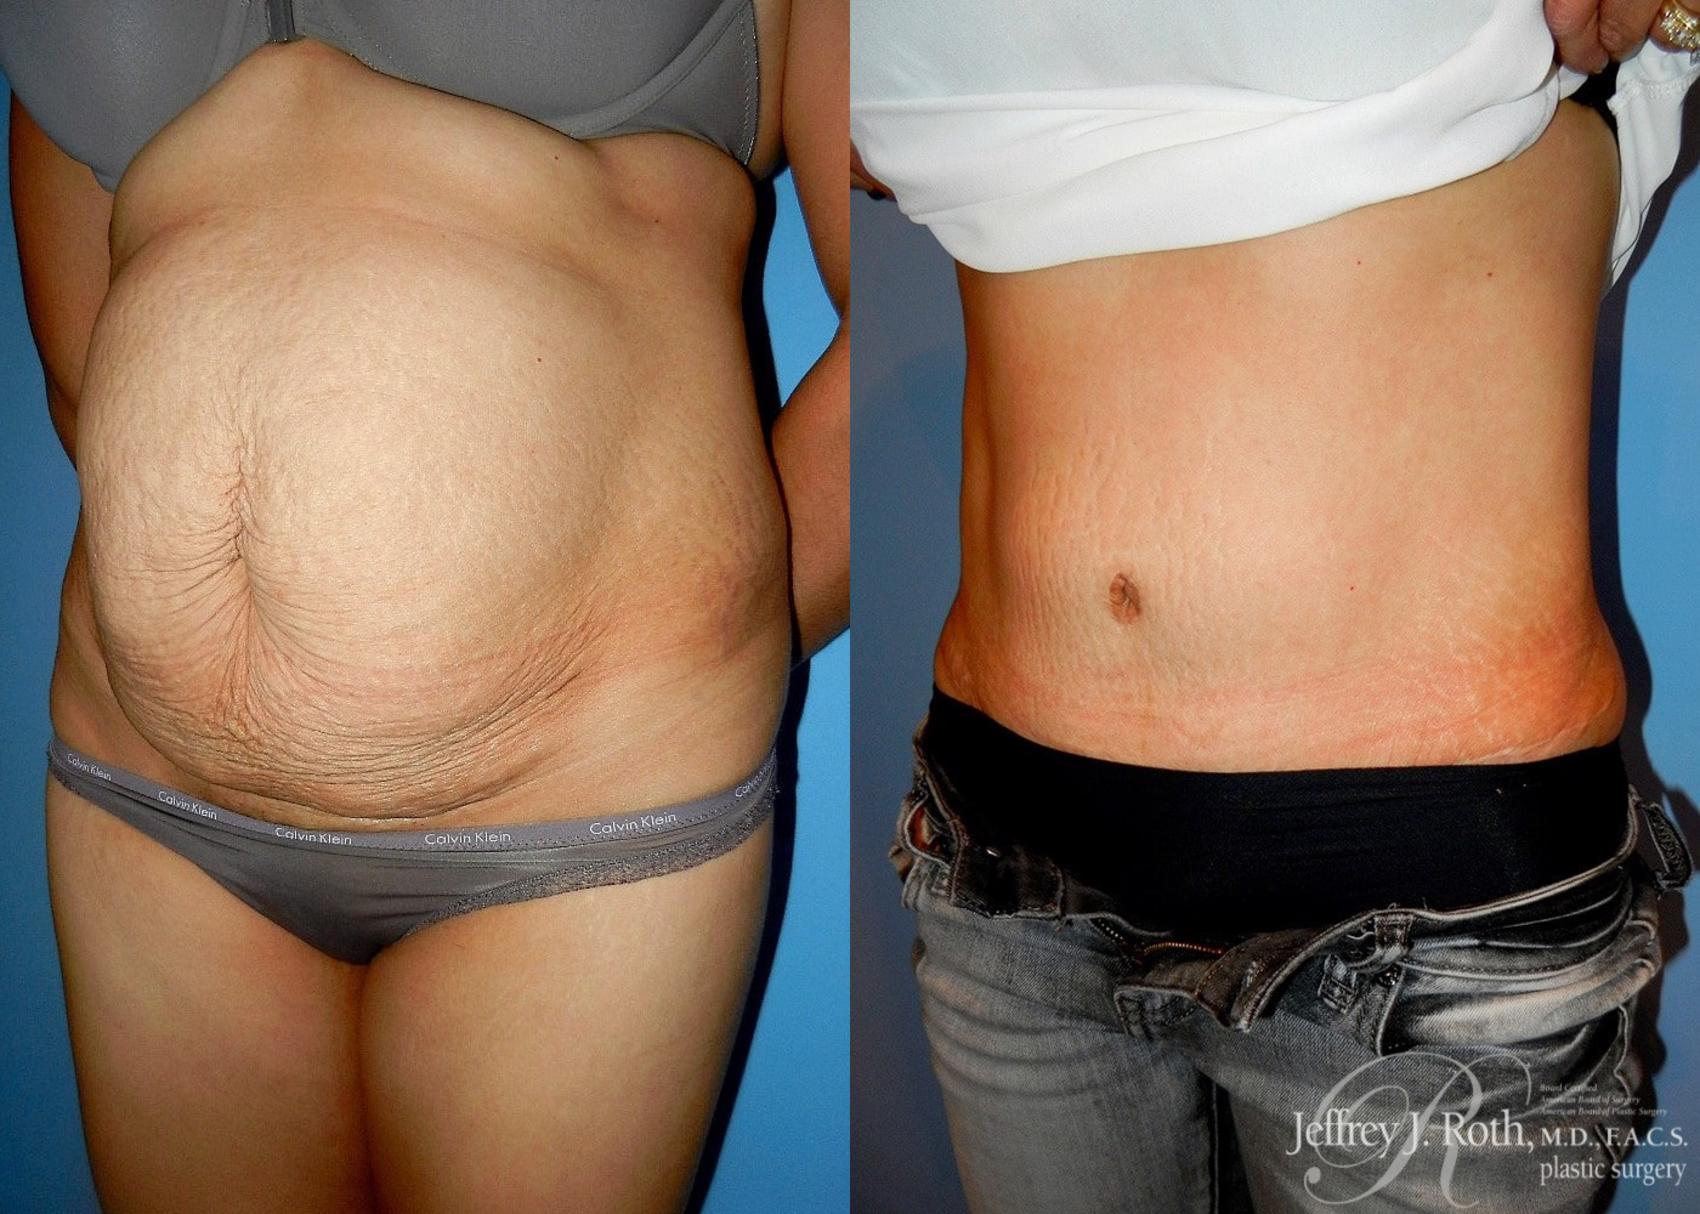 Tummy Tuck Before and After Pictures Case 27 | Las Vegas, NV | Las Vegas Plastic  Surgery: Jeffrey J. Roth . .S.